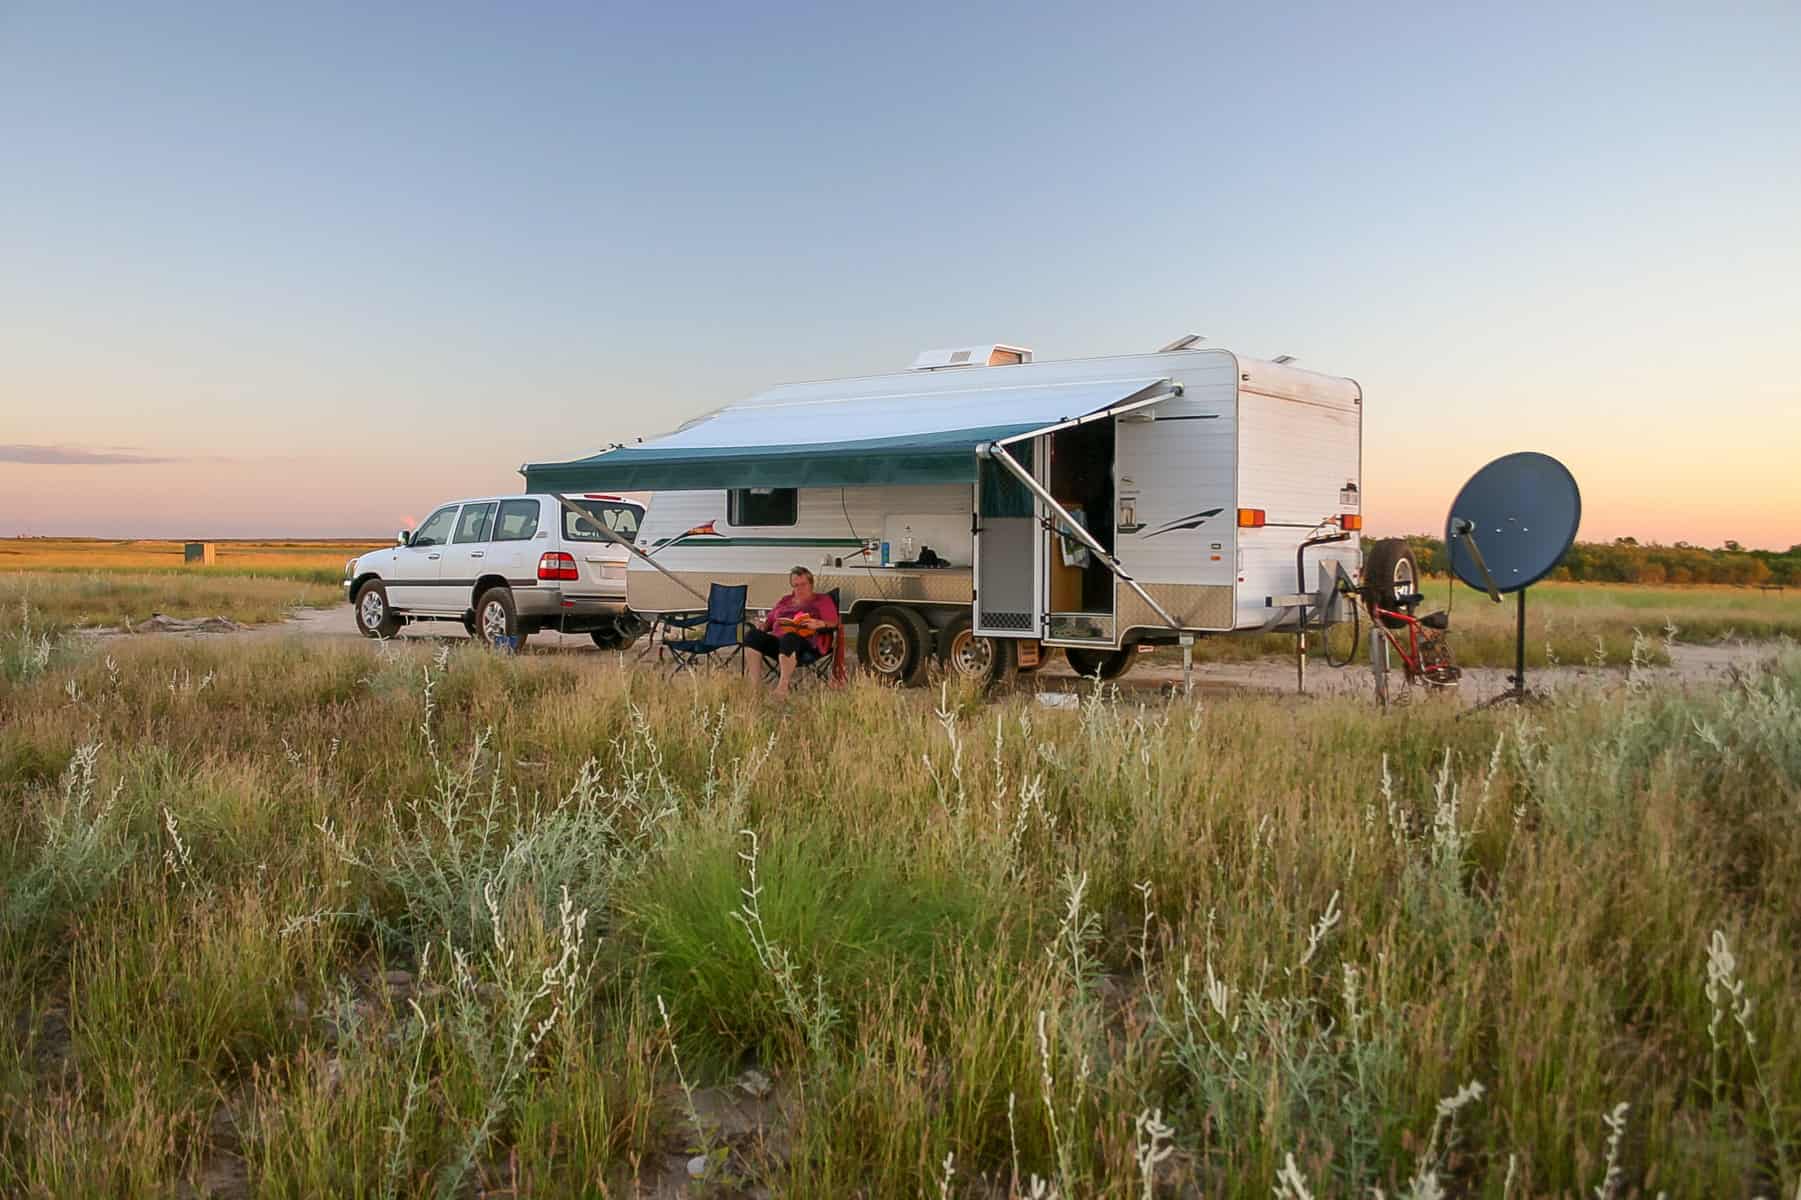 RV campsite neighbors with good manners (Image: Shutterstock)